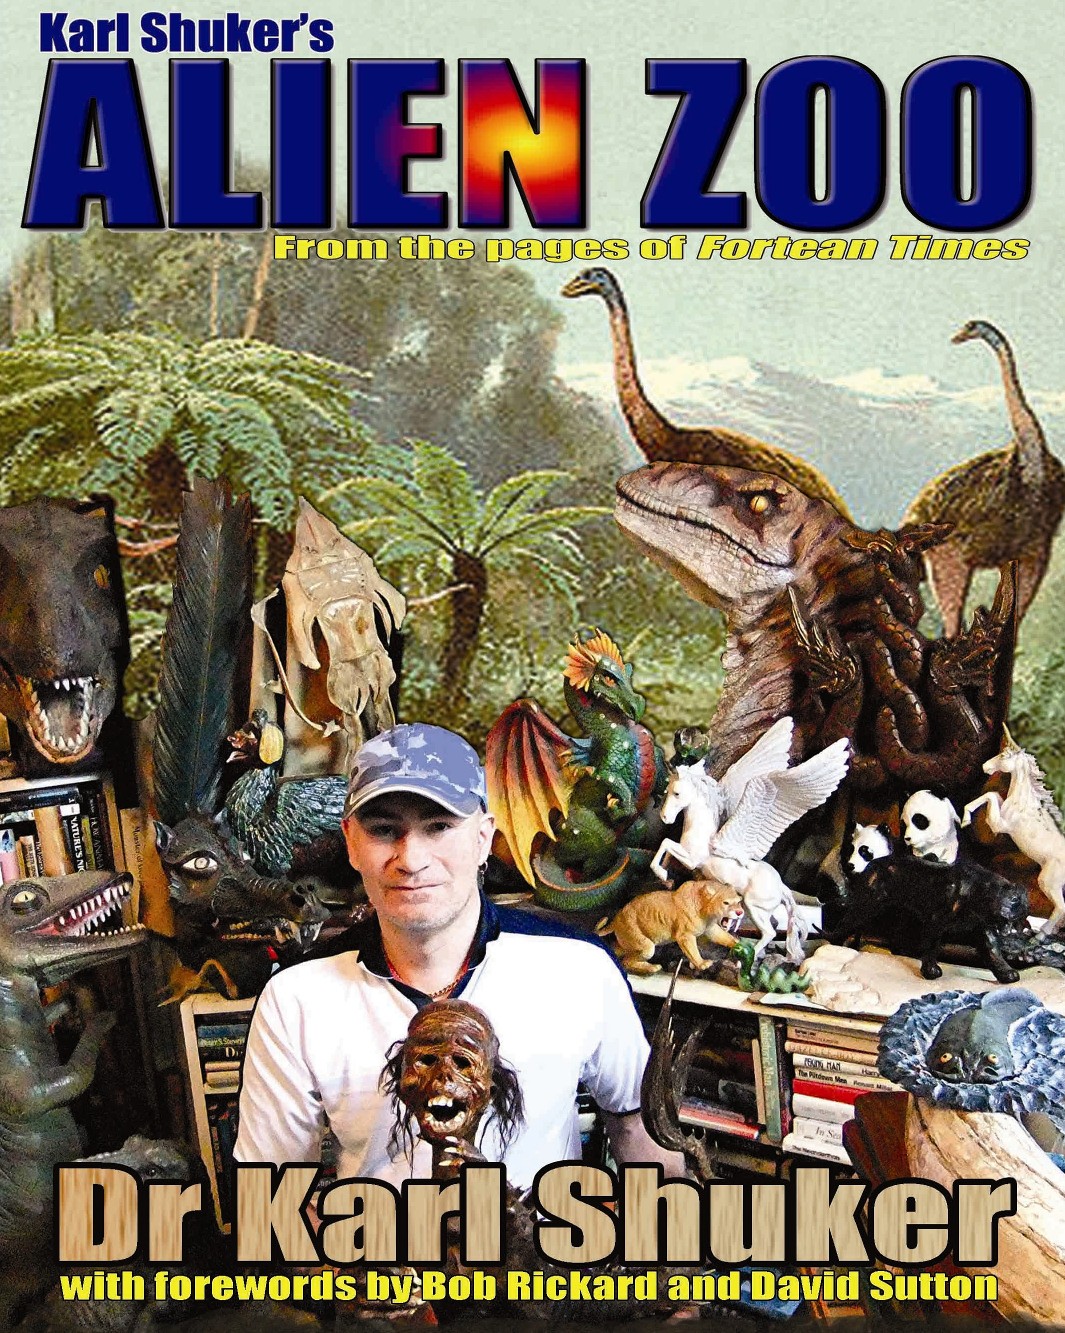 Karl Shuker's Alien Zoo - From the Pages of Fortean Times